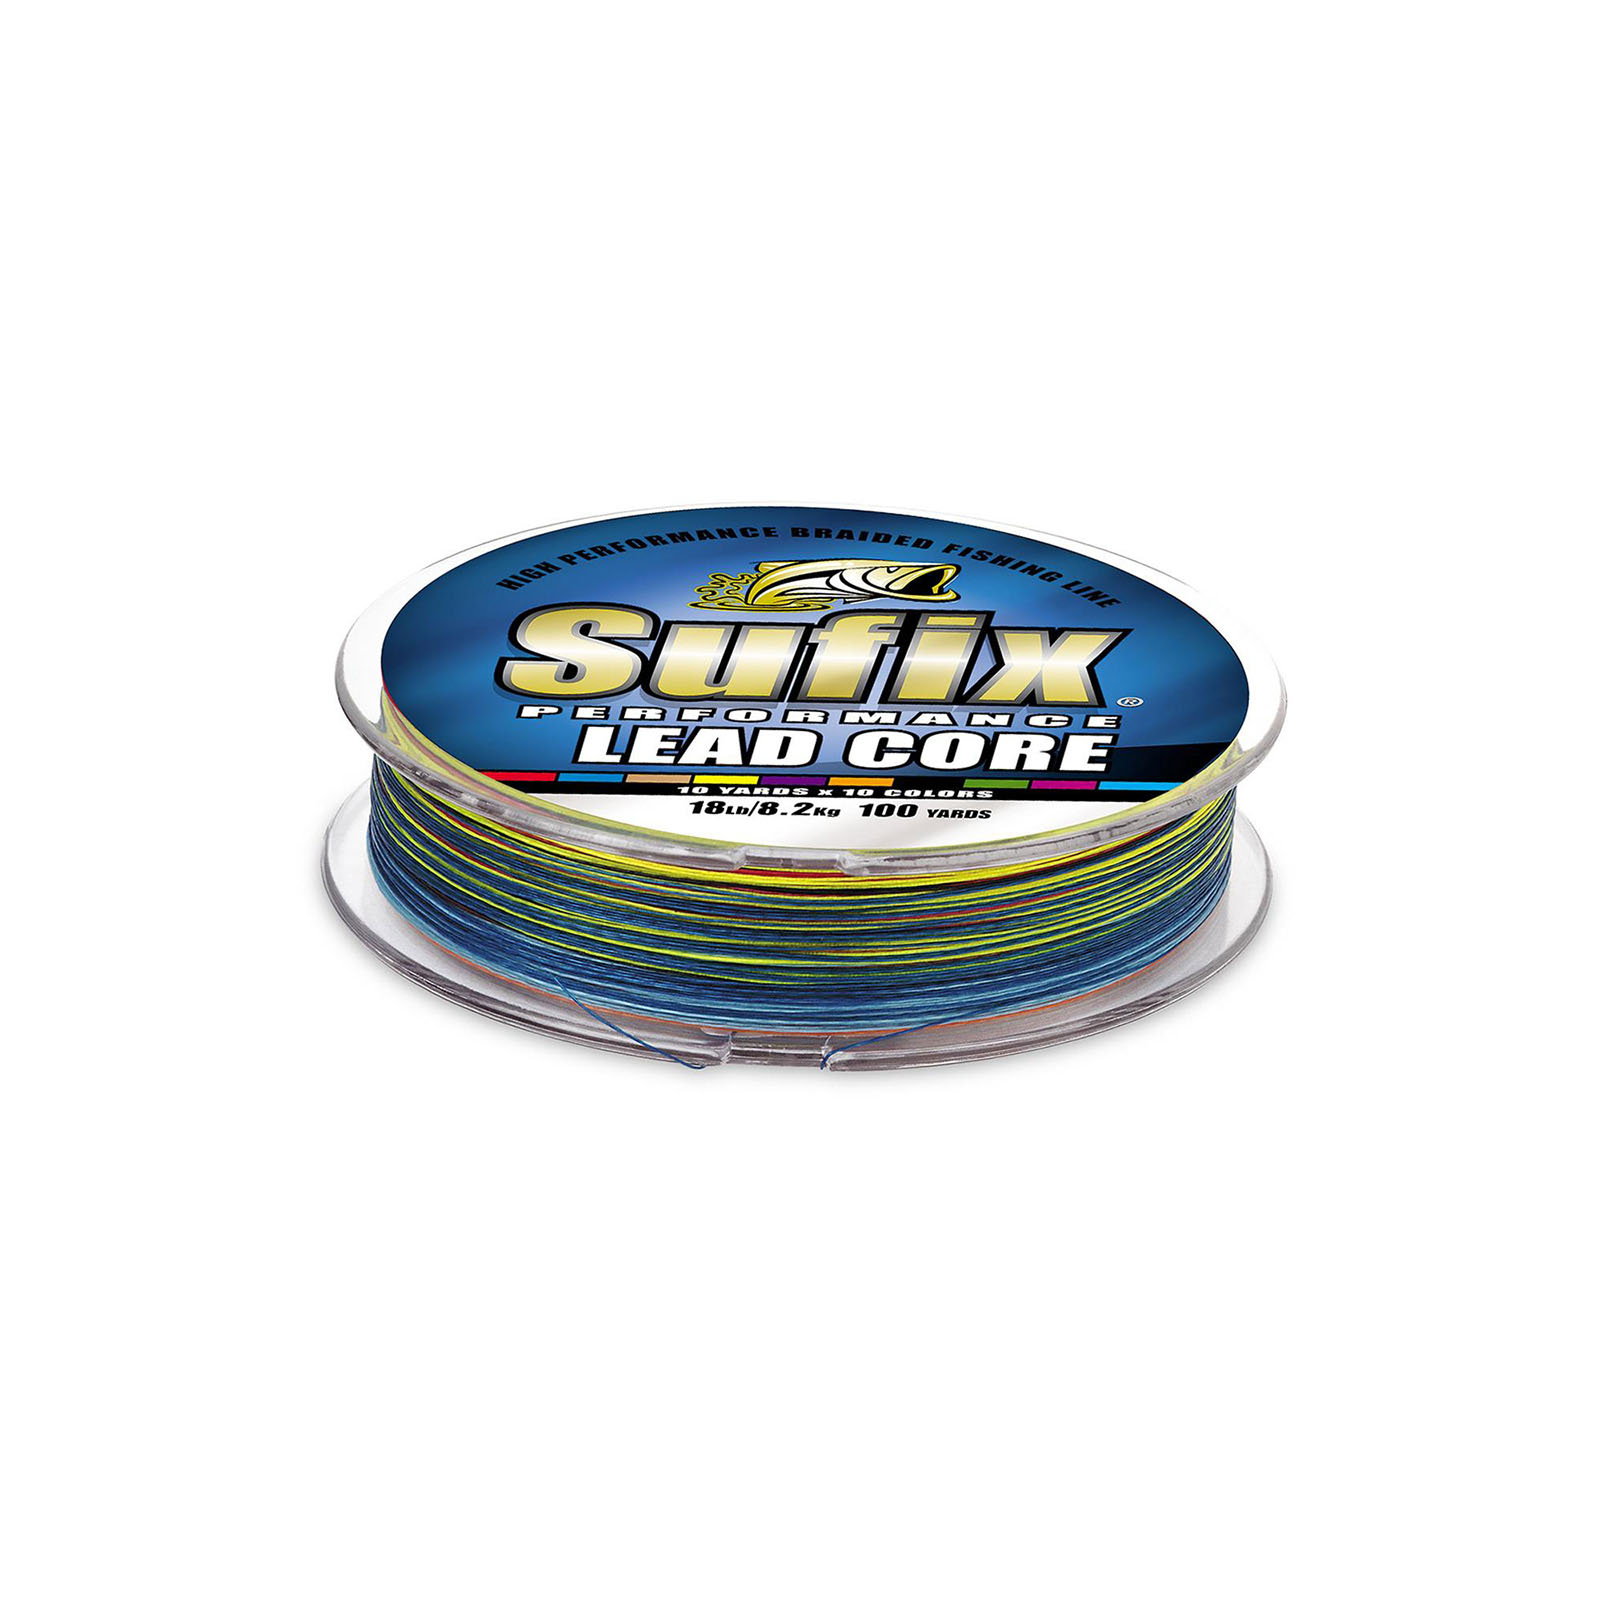 Sufix Performance Lead Core - Metered - 27 lb. 600 yds.